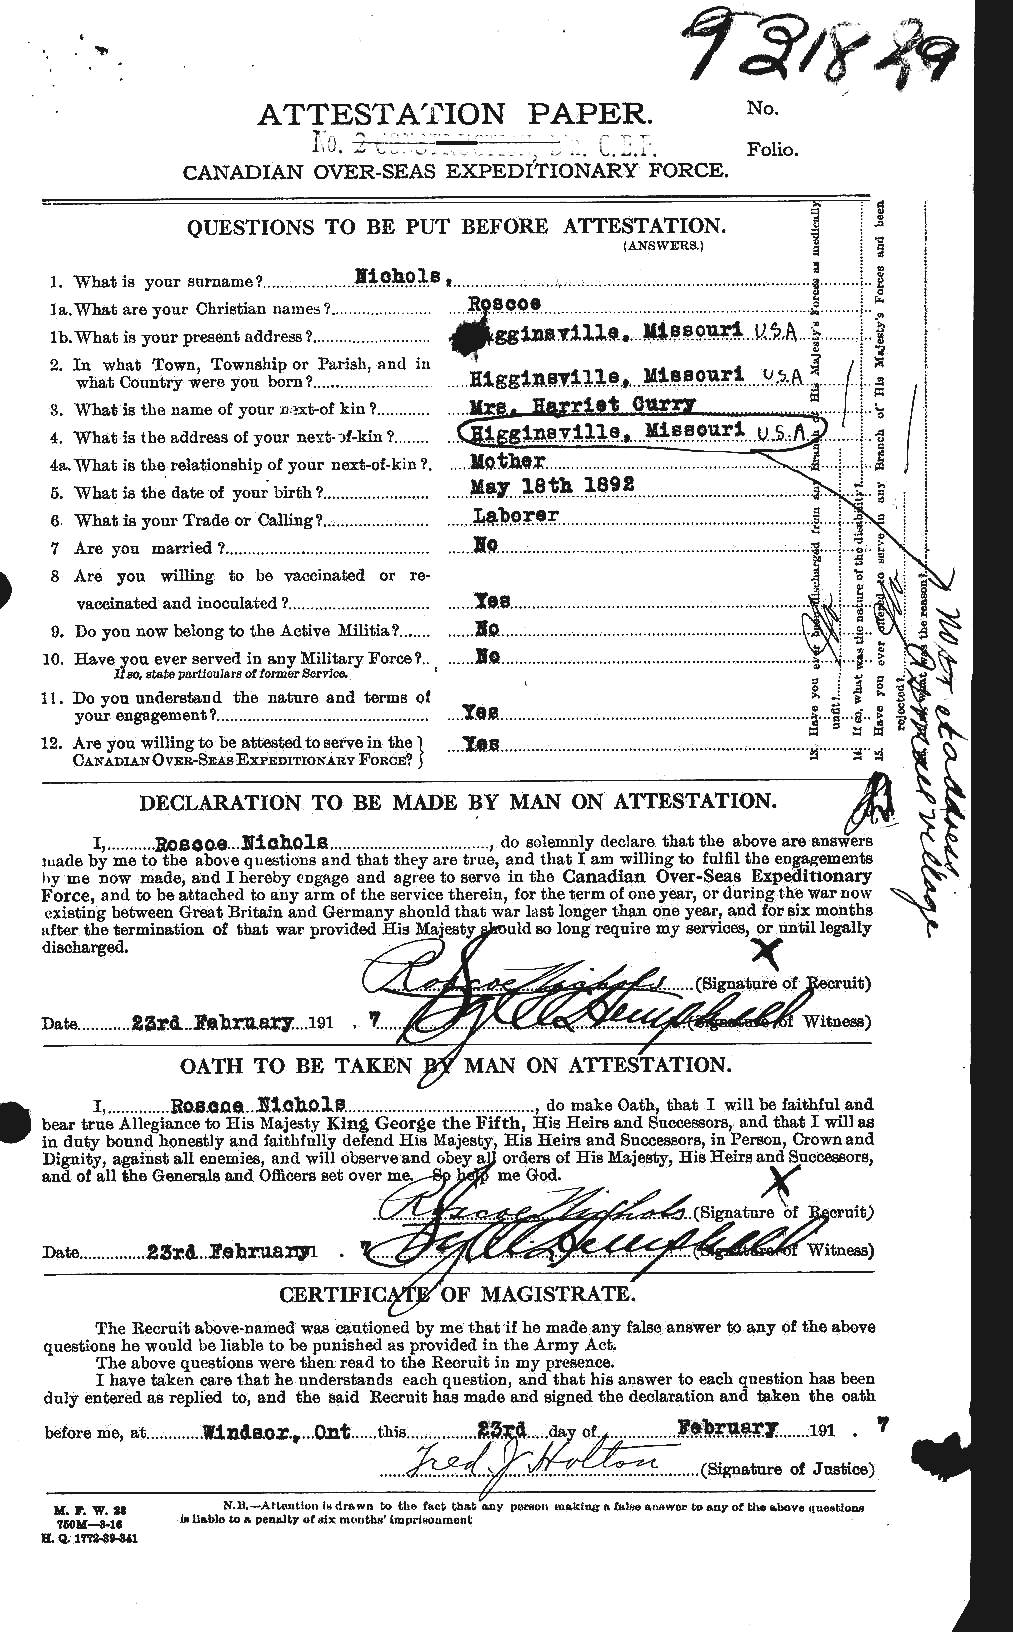 Personnel Records of the First World War - CEF 551037a